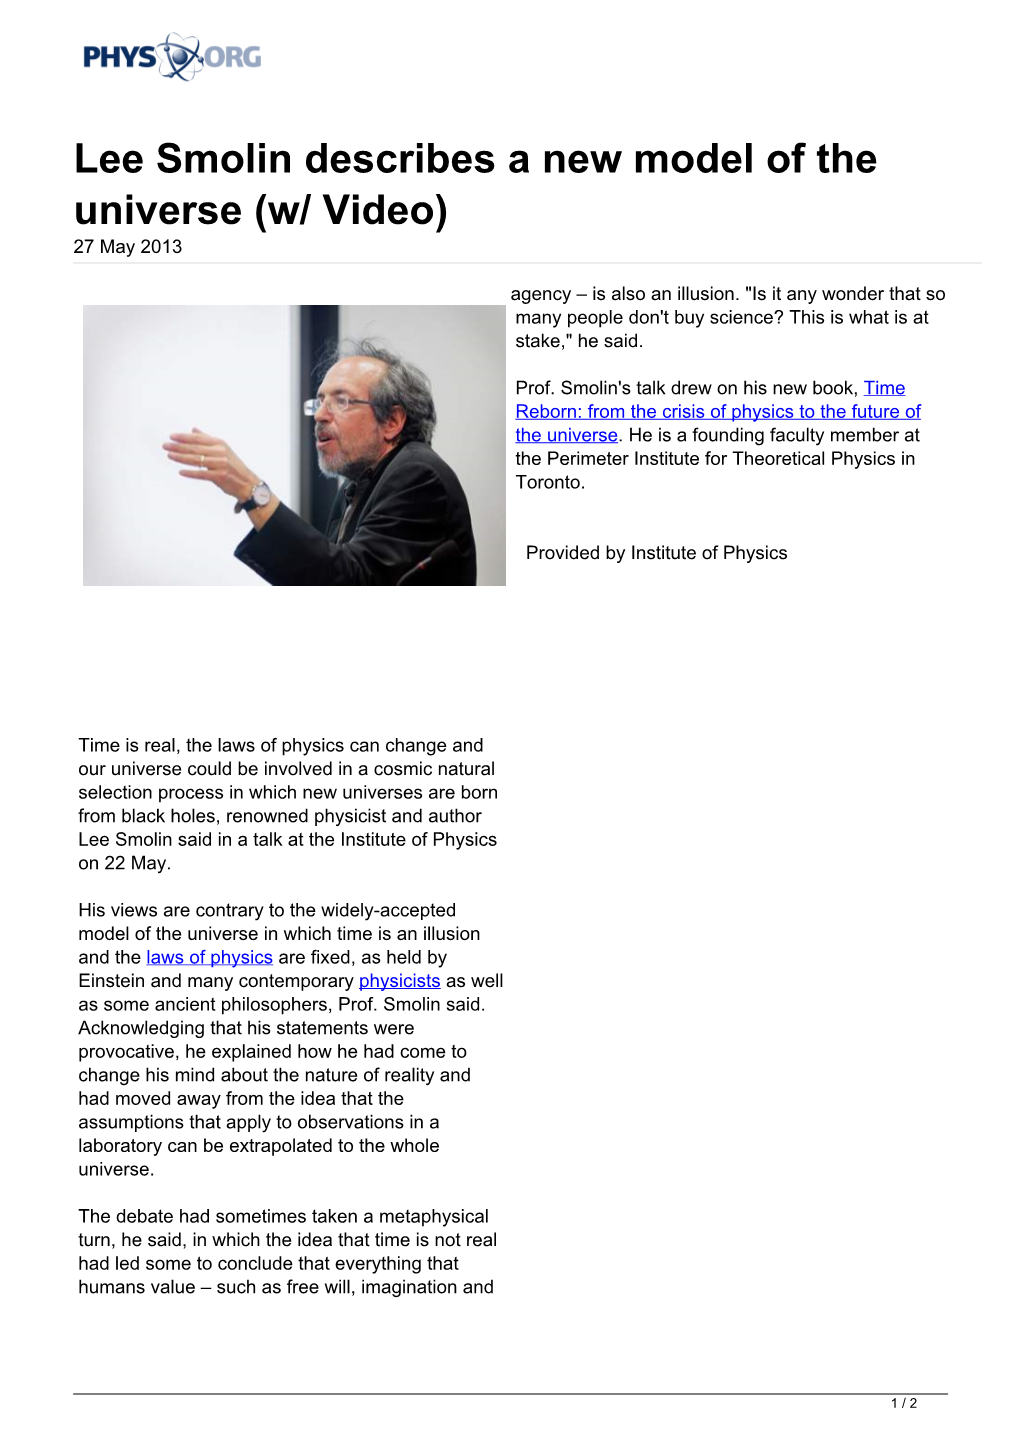 Lee Smolin Describes a New Model of the Universe (W/ Video) 27 May 2013